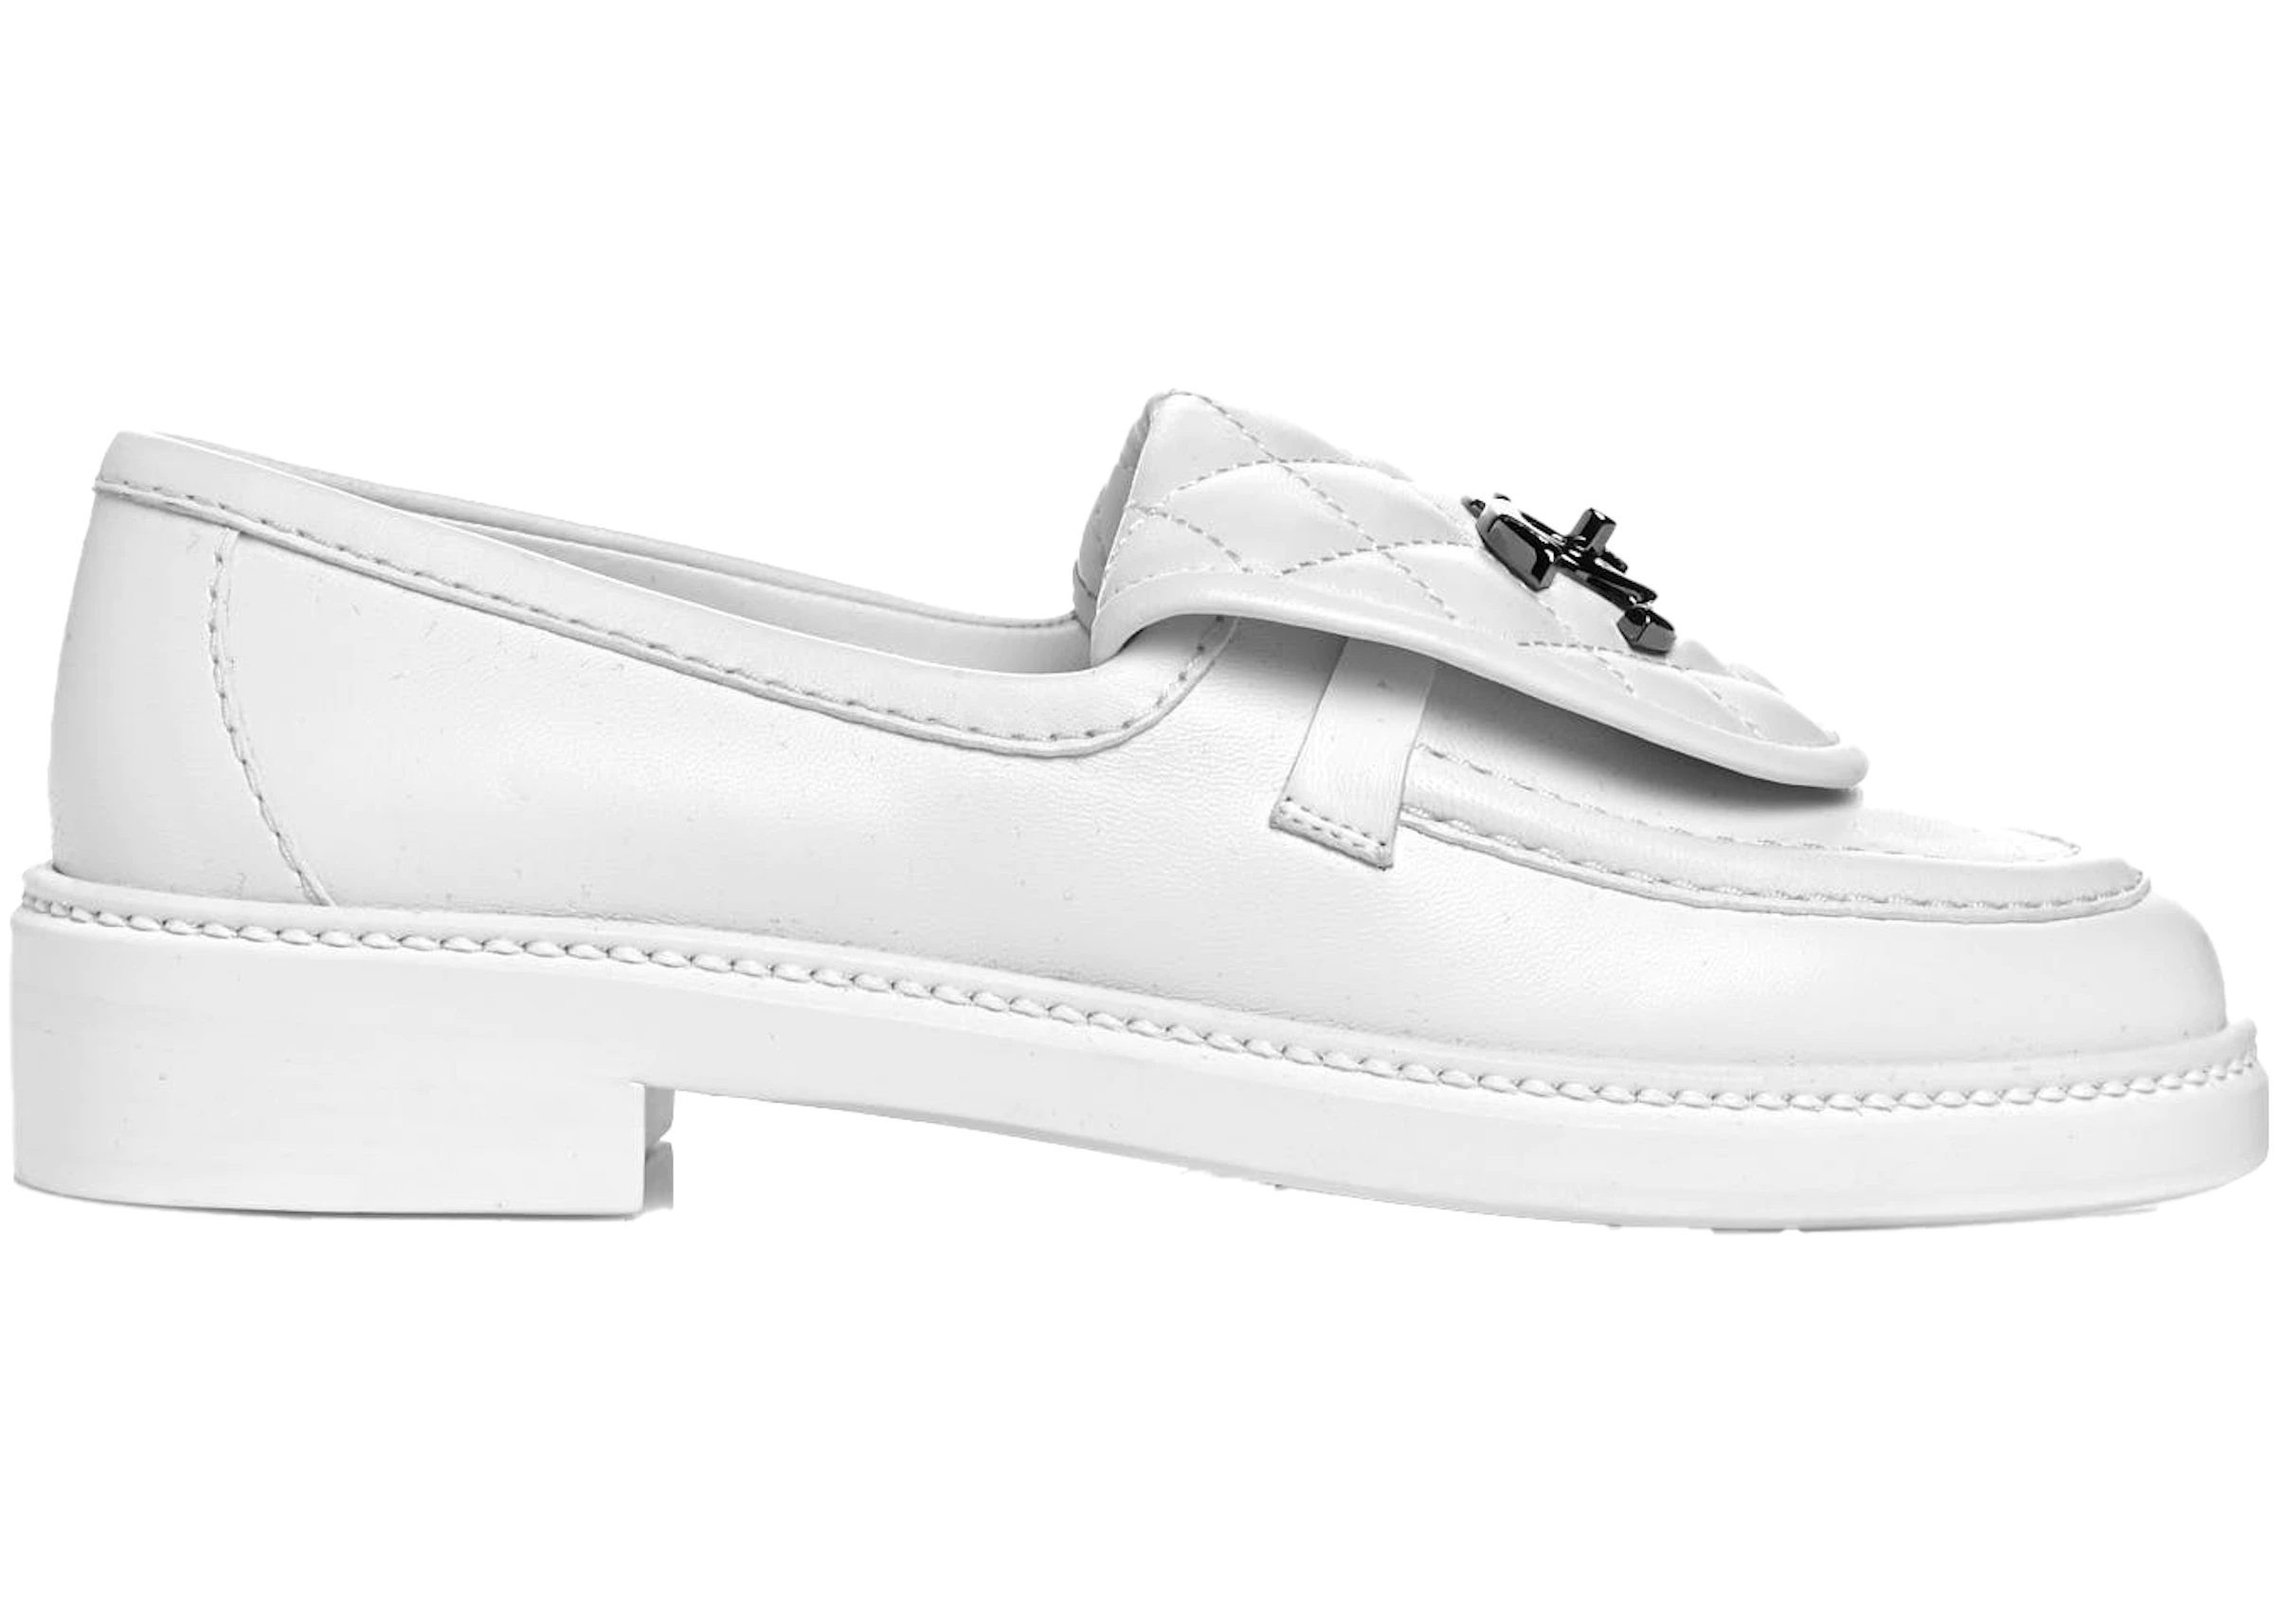 Buy Chanel Loafers Shoes & New Sneakers - StockX